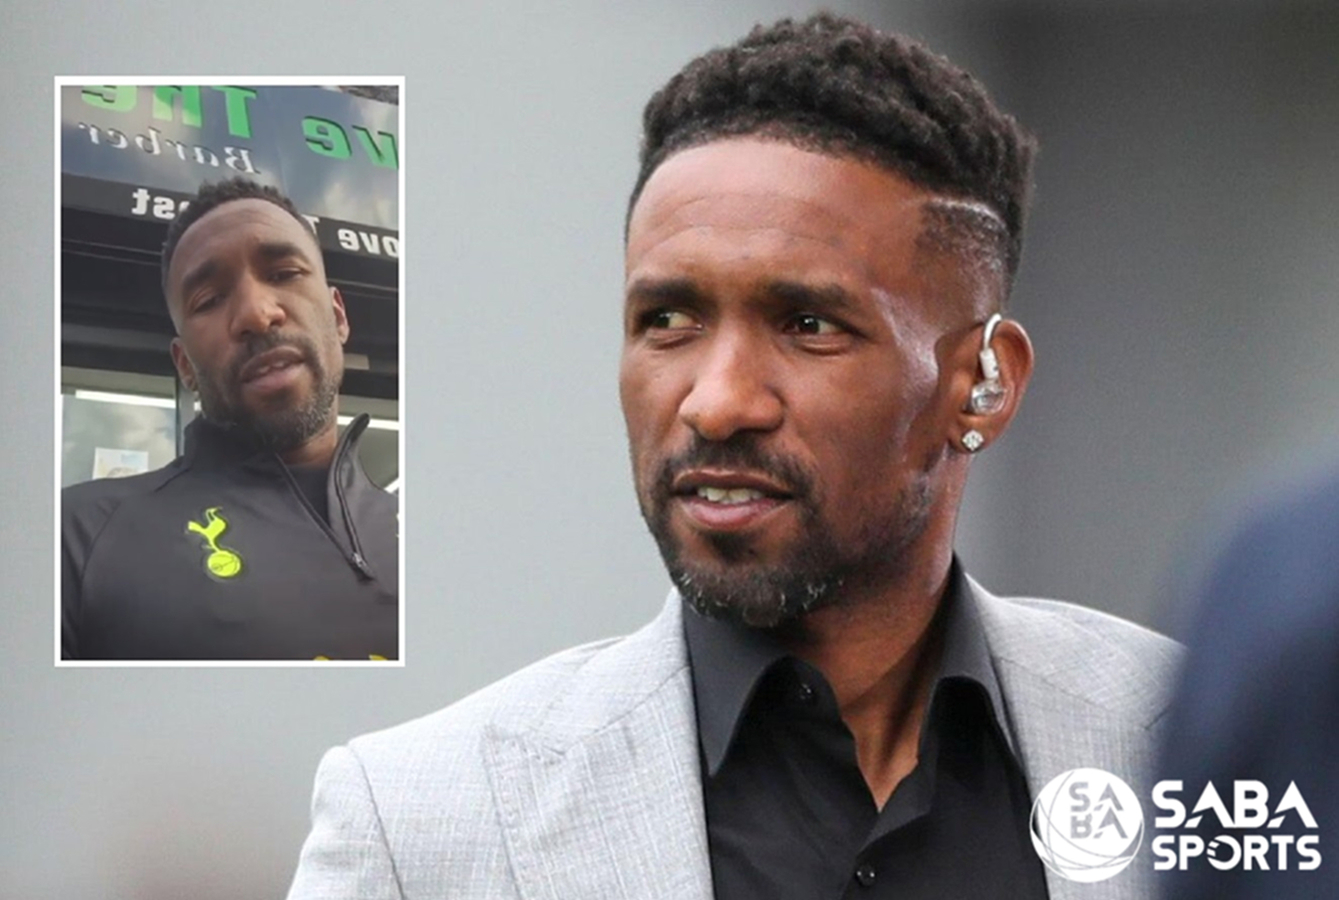 Jermain Defoe gives 100 kids to have a free haircut